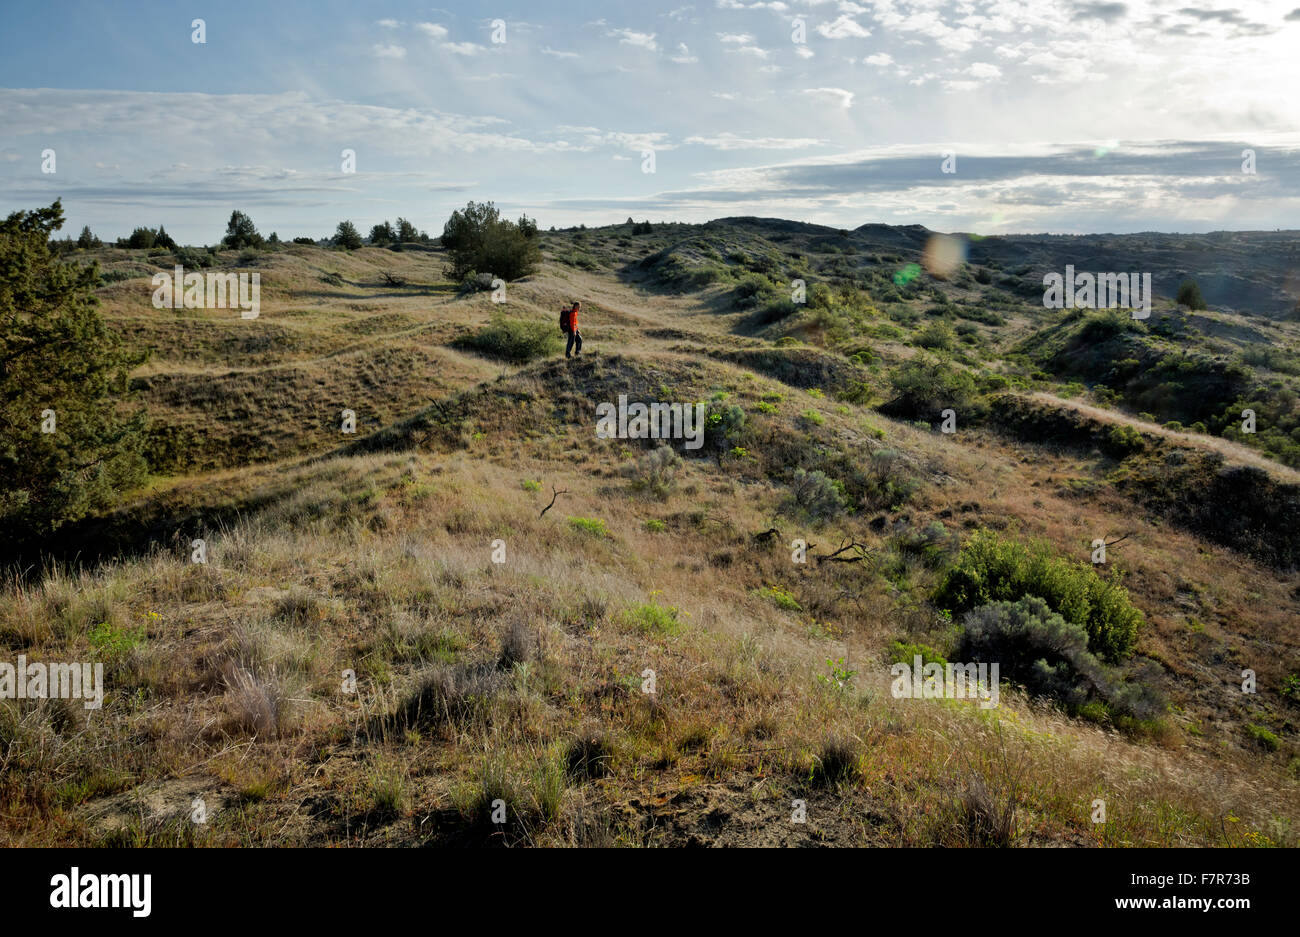 WA12206-00...WASHINGTON - Hiker climbing a grass covered sand dune in Juniper Dunes Wilderness Area located north of Pasco. Stock Photo